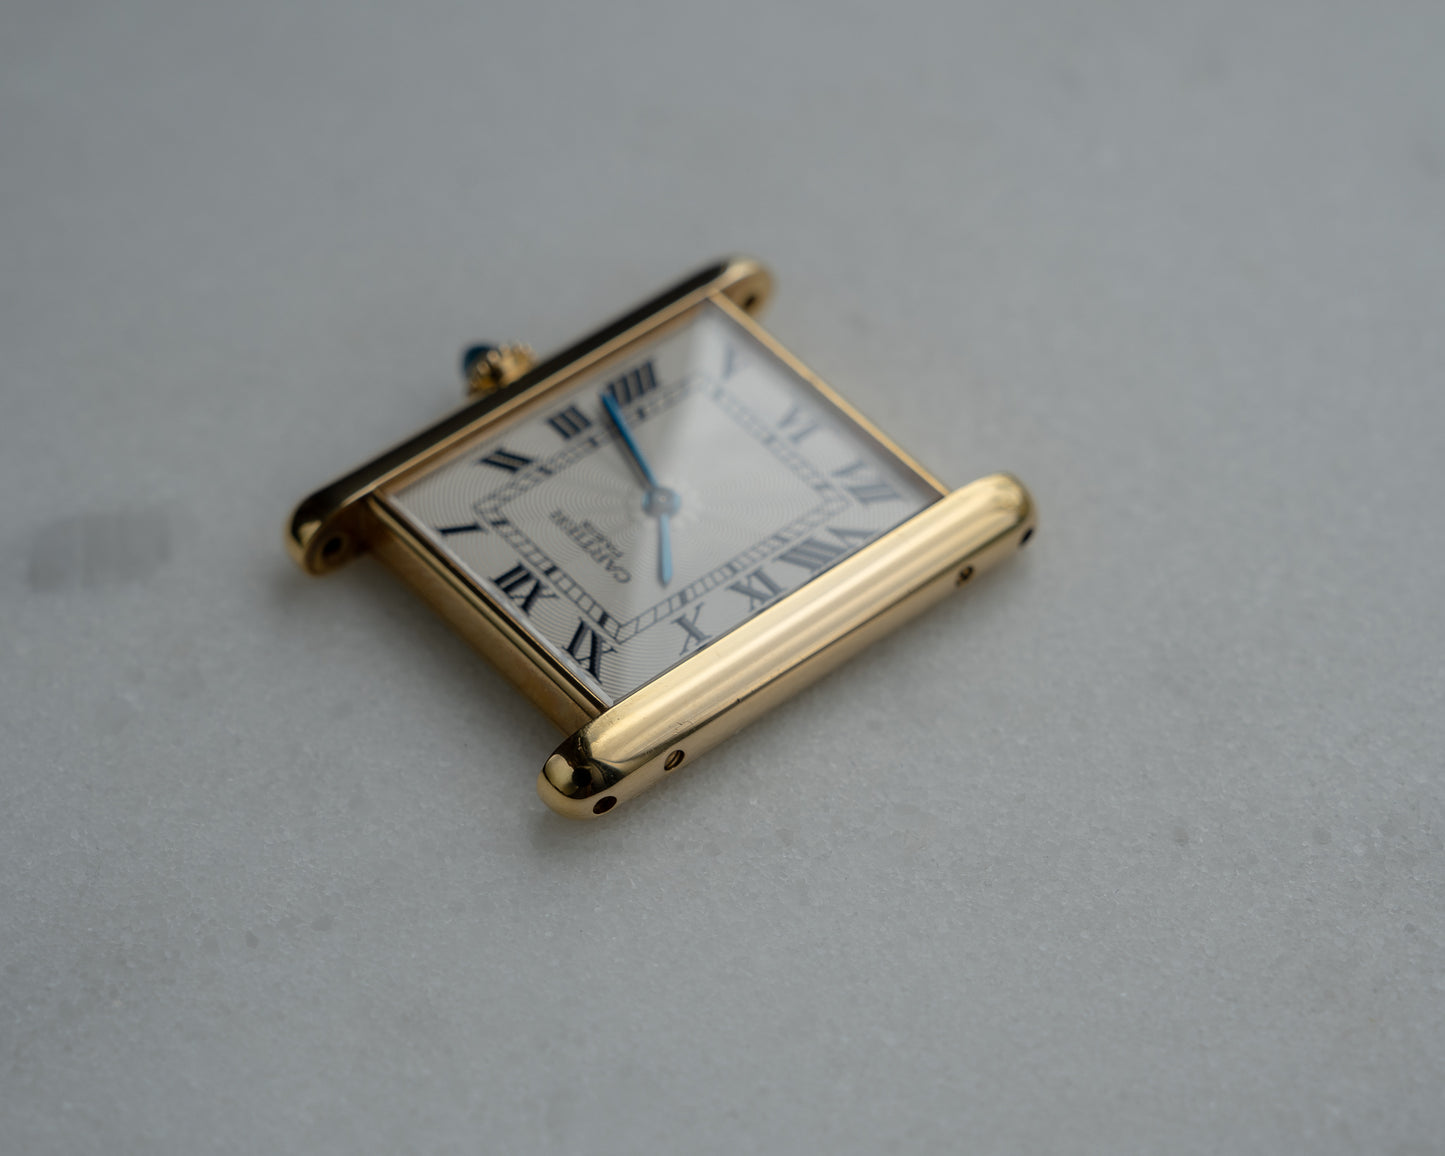 Cartier Tank Louis LM in YG, CPCP "Collection Prive" later rosette dial, full set